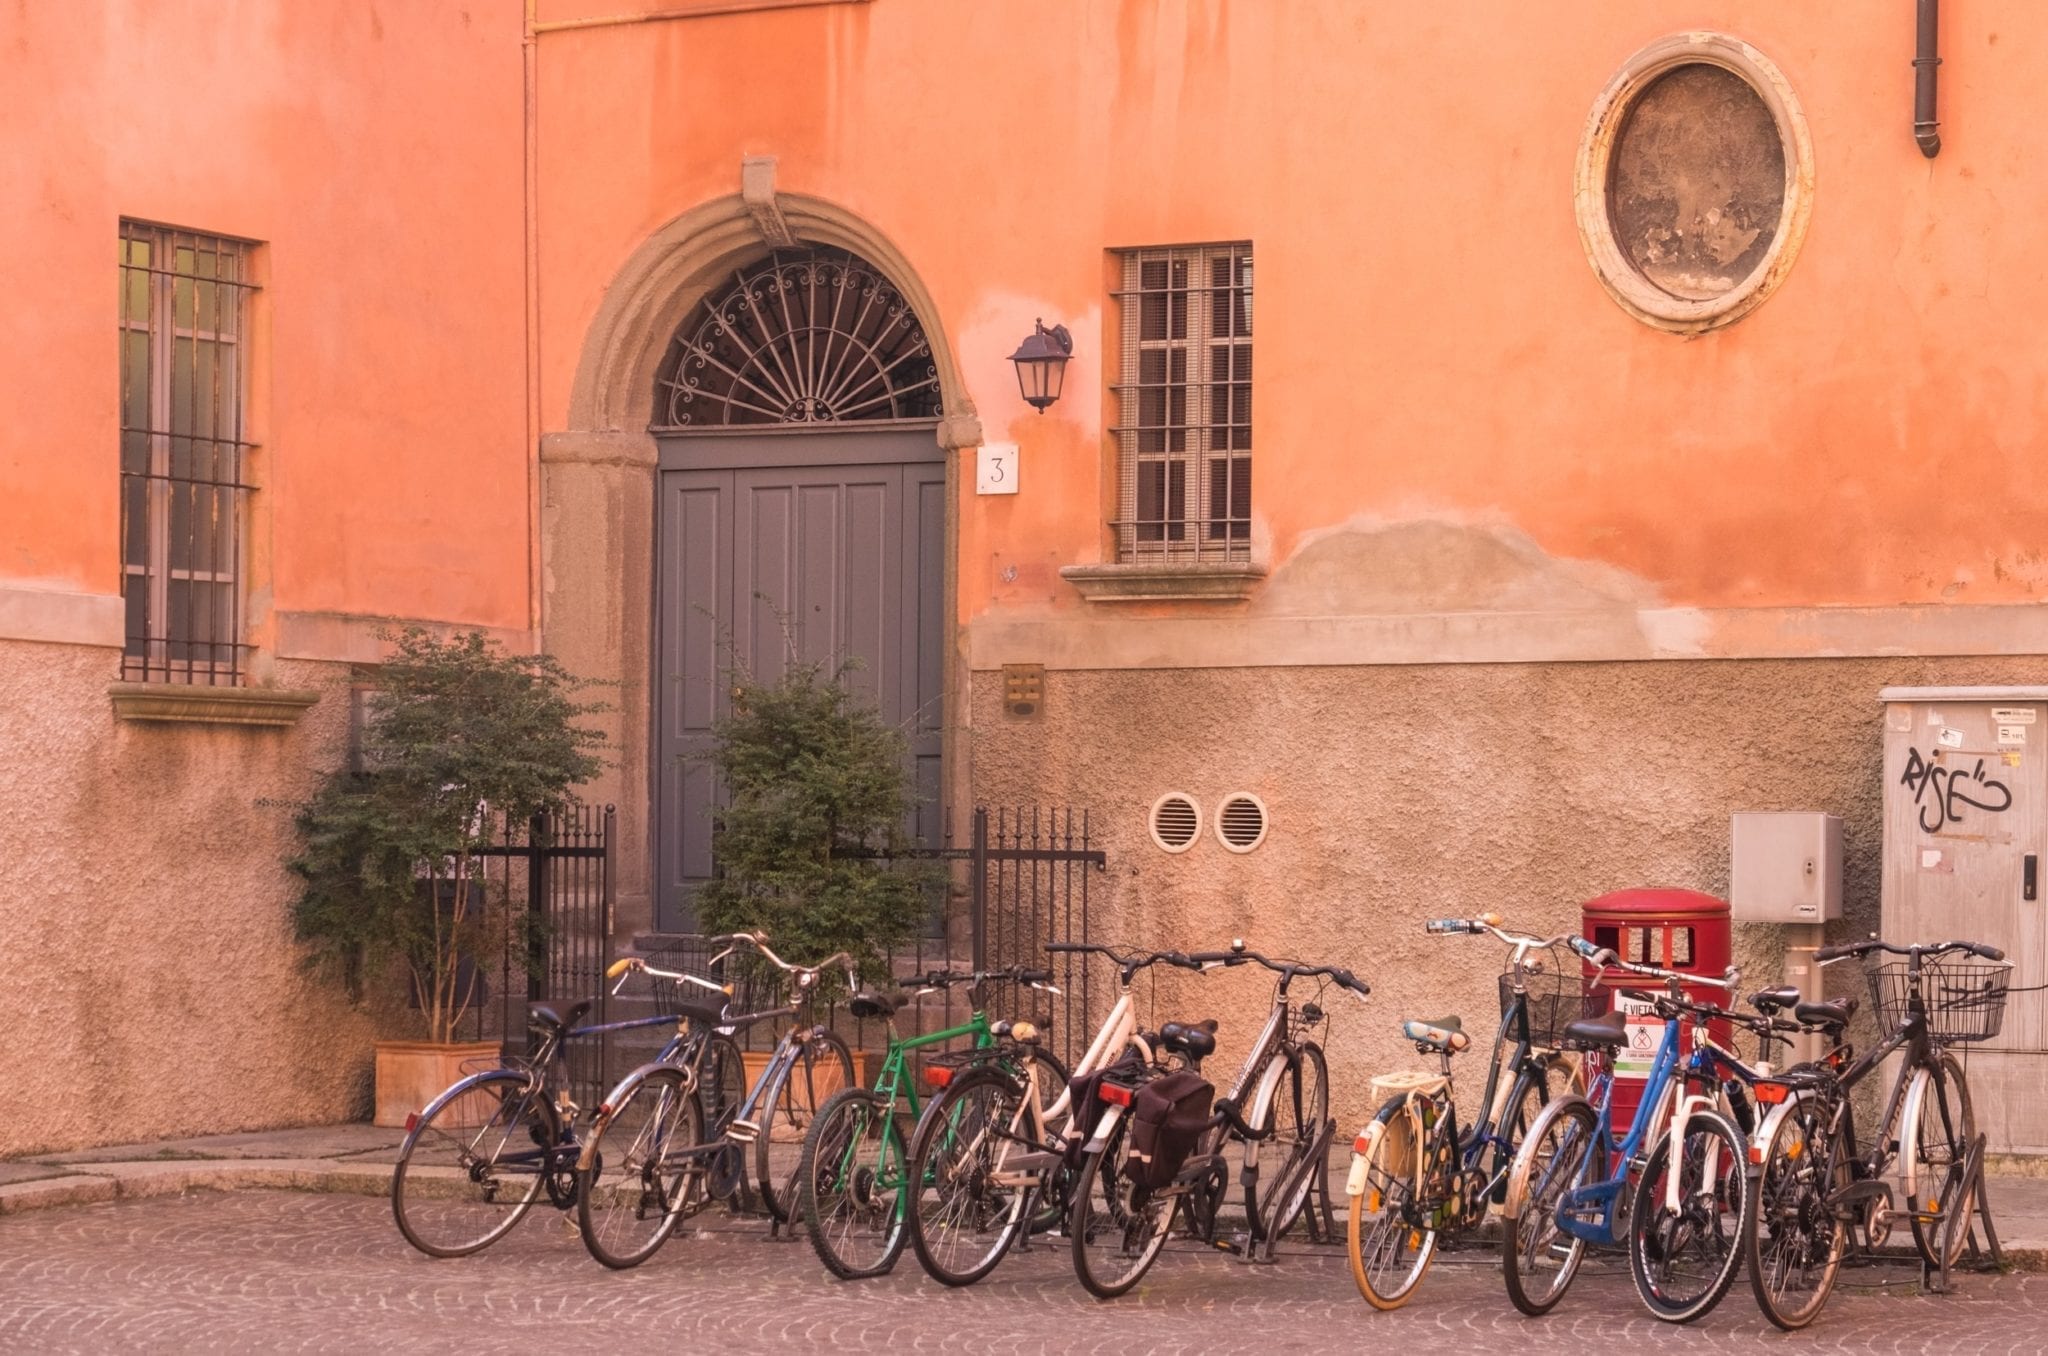 Several bicycles parked outside a building with a bright pink wall and a large gray-blue door.